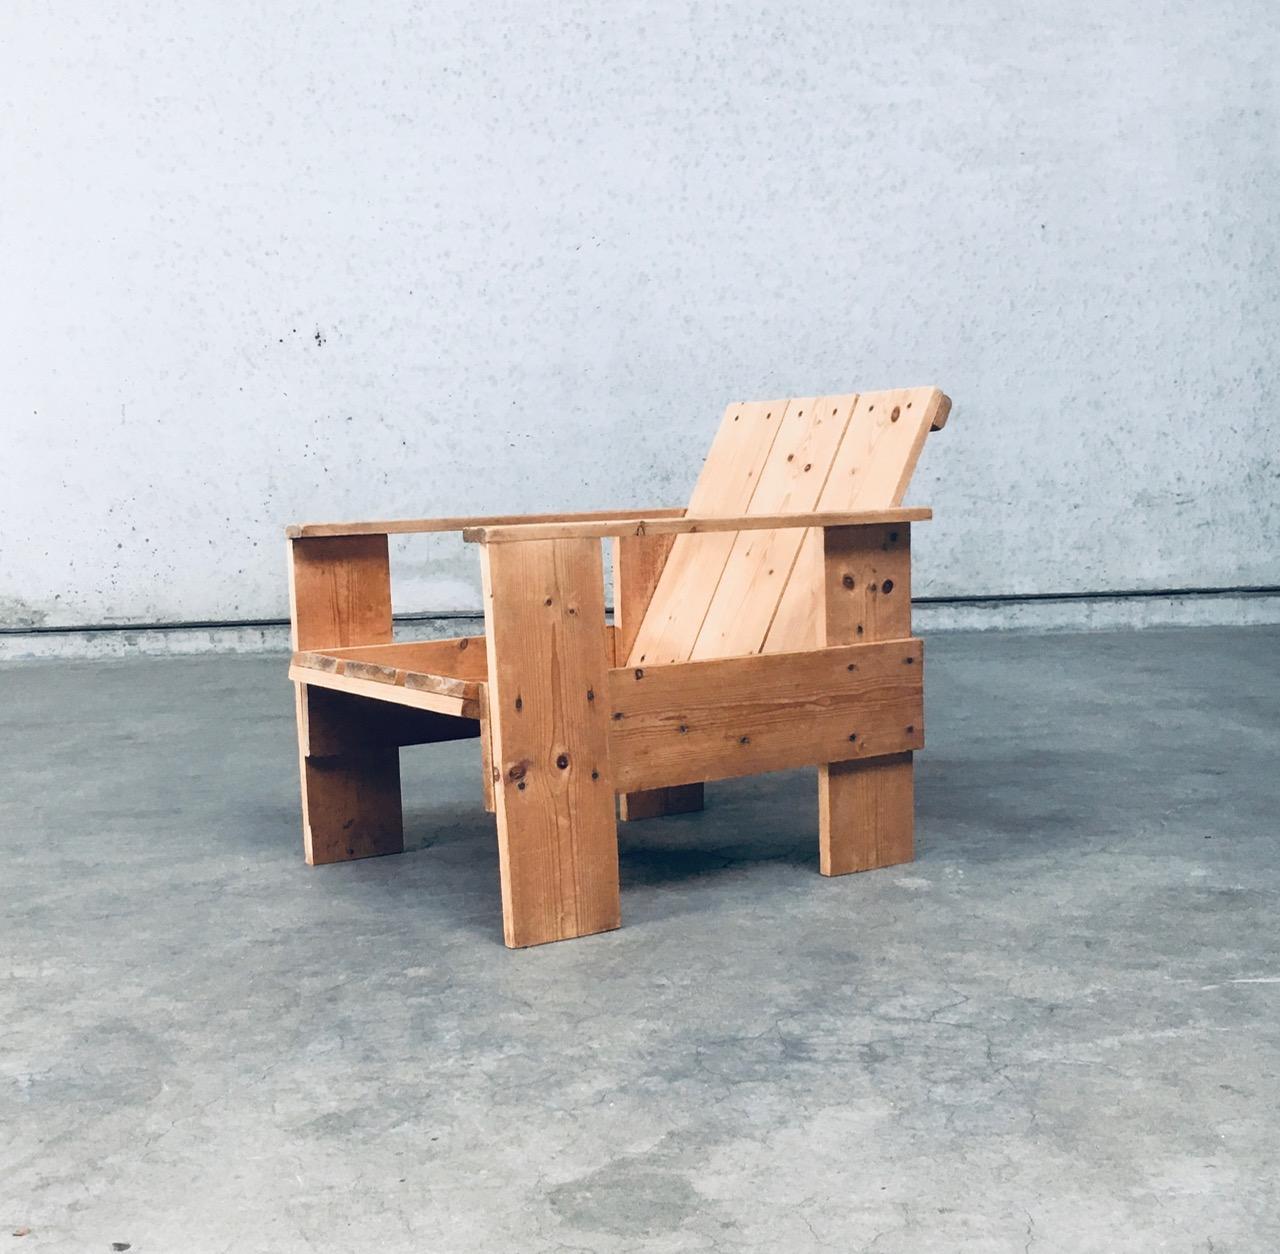 De Stijl Movement Dutch Design Pine CRATE Chair by Gerrit Rietveld In Good Condition For Sale In Oud-Turnhout, VAN